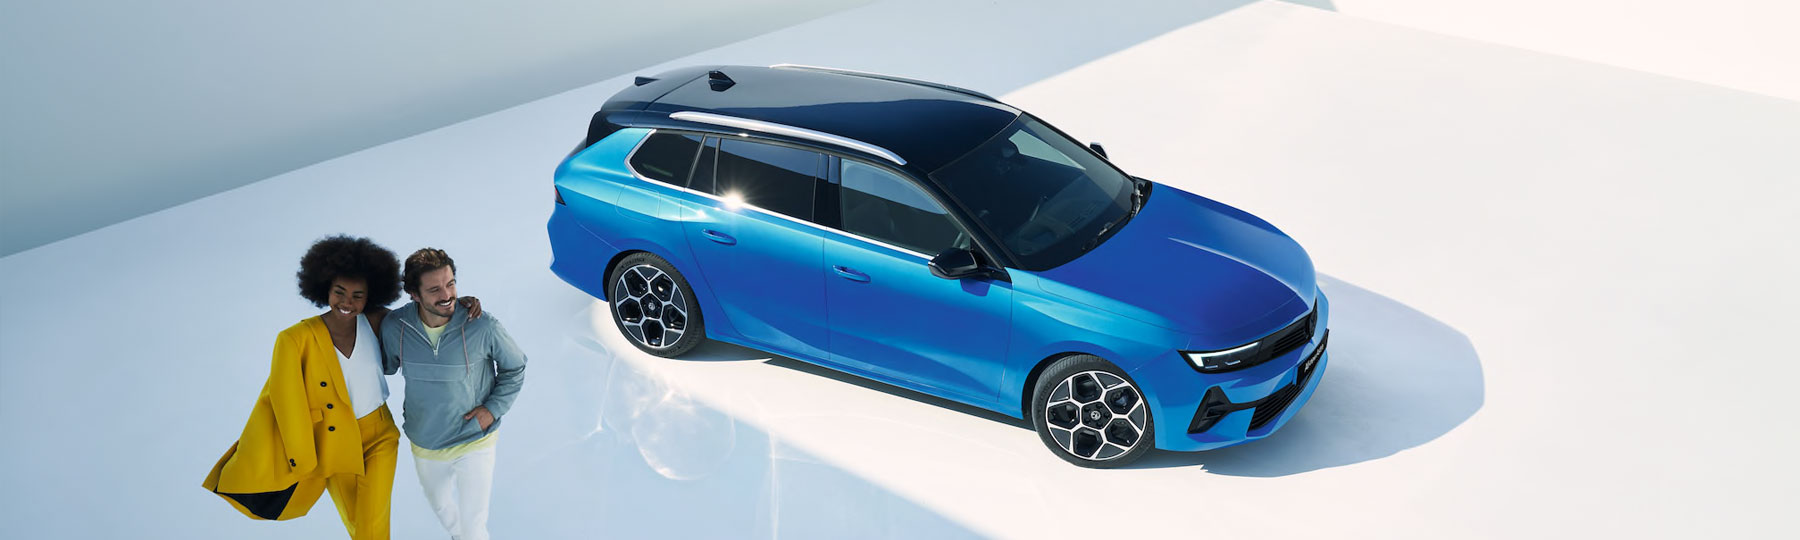 All-New Vauxhall Astra Sports Tourer New Electric Car Offer